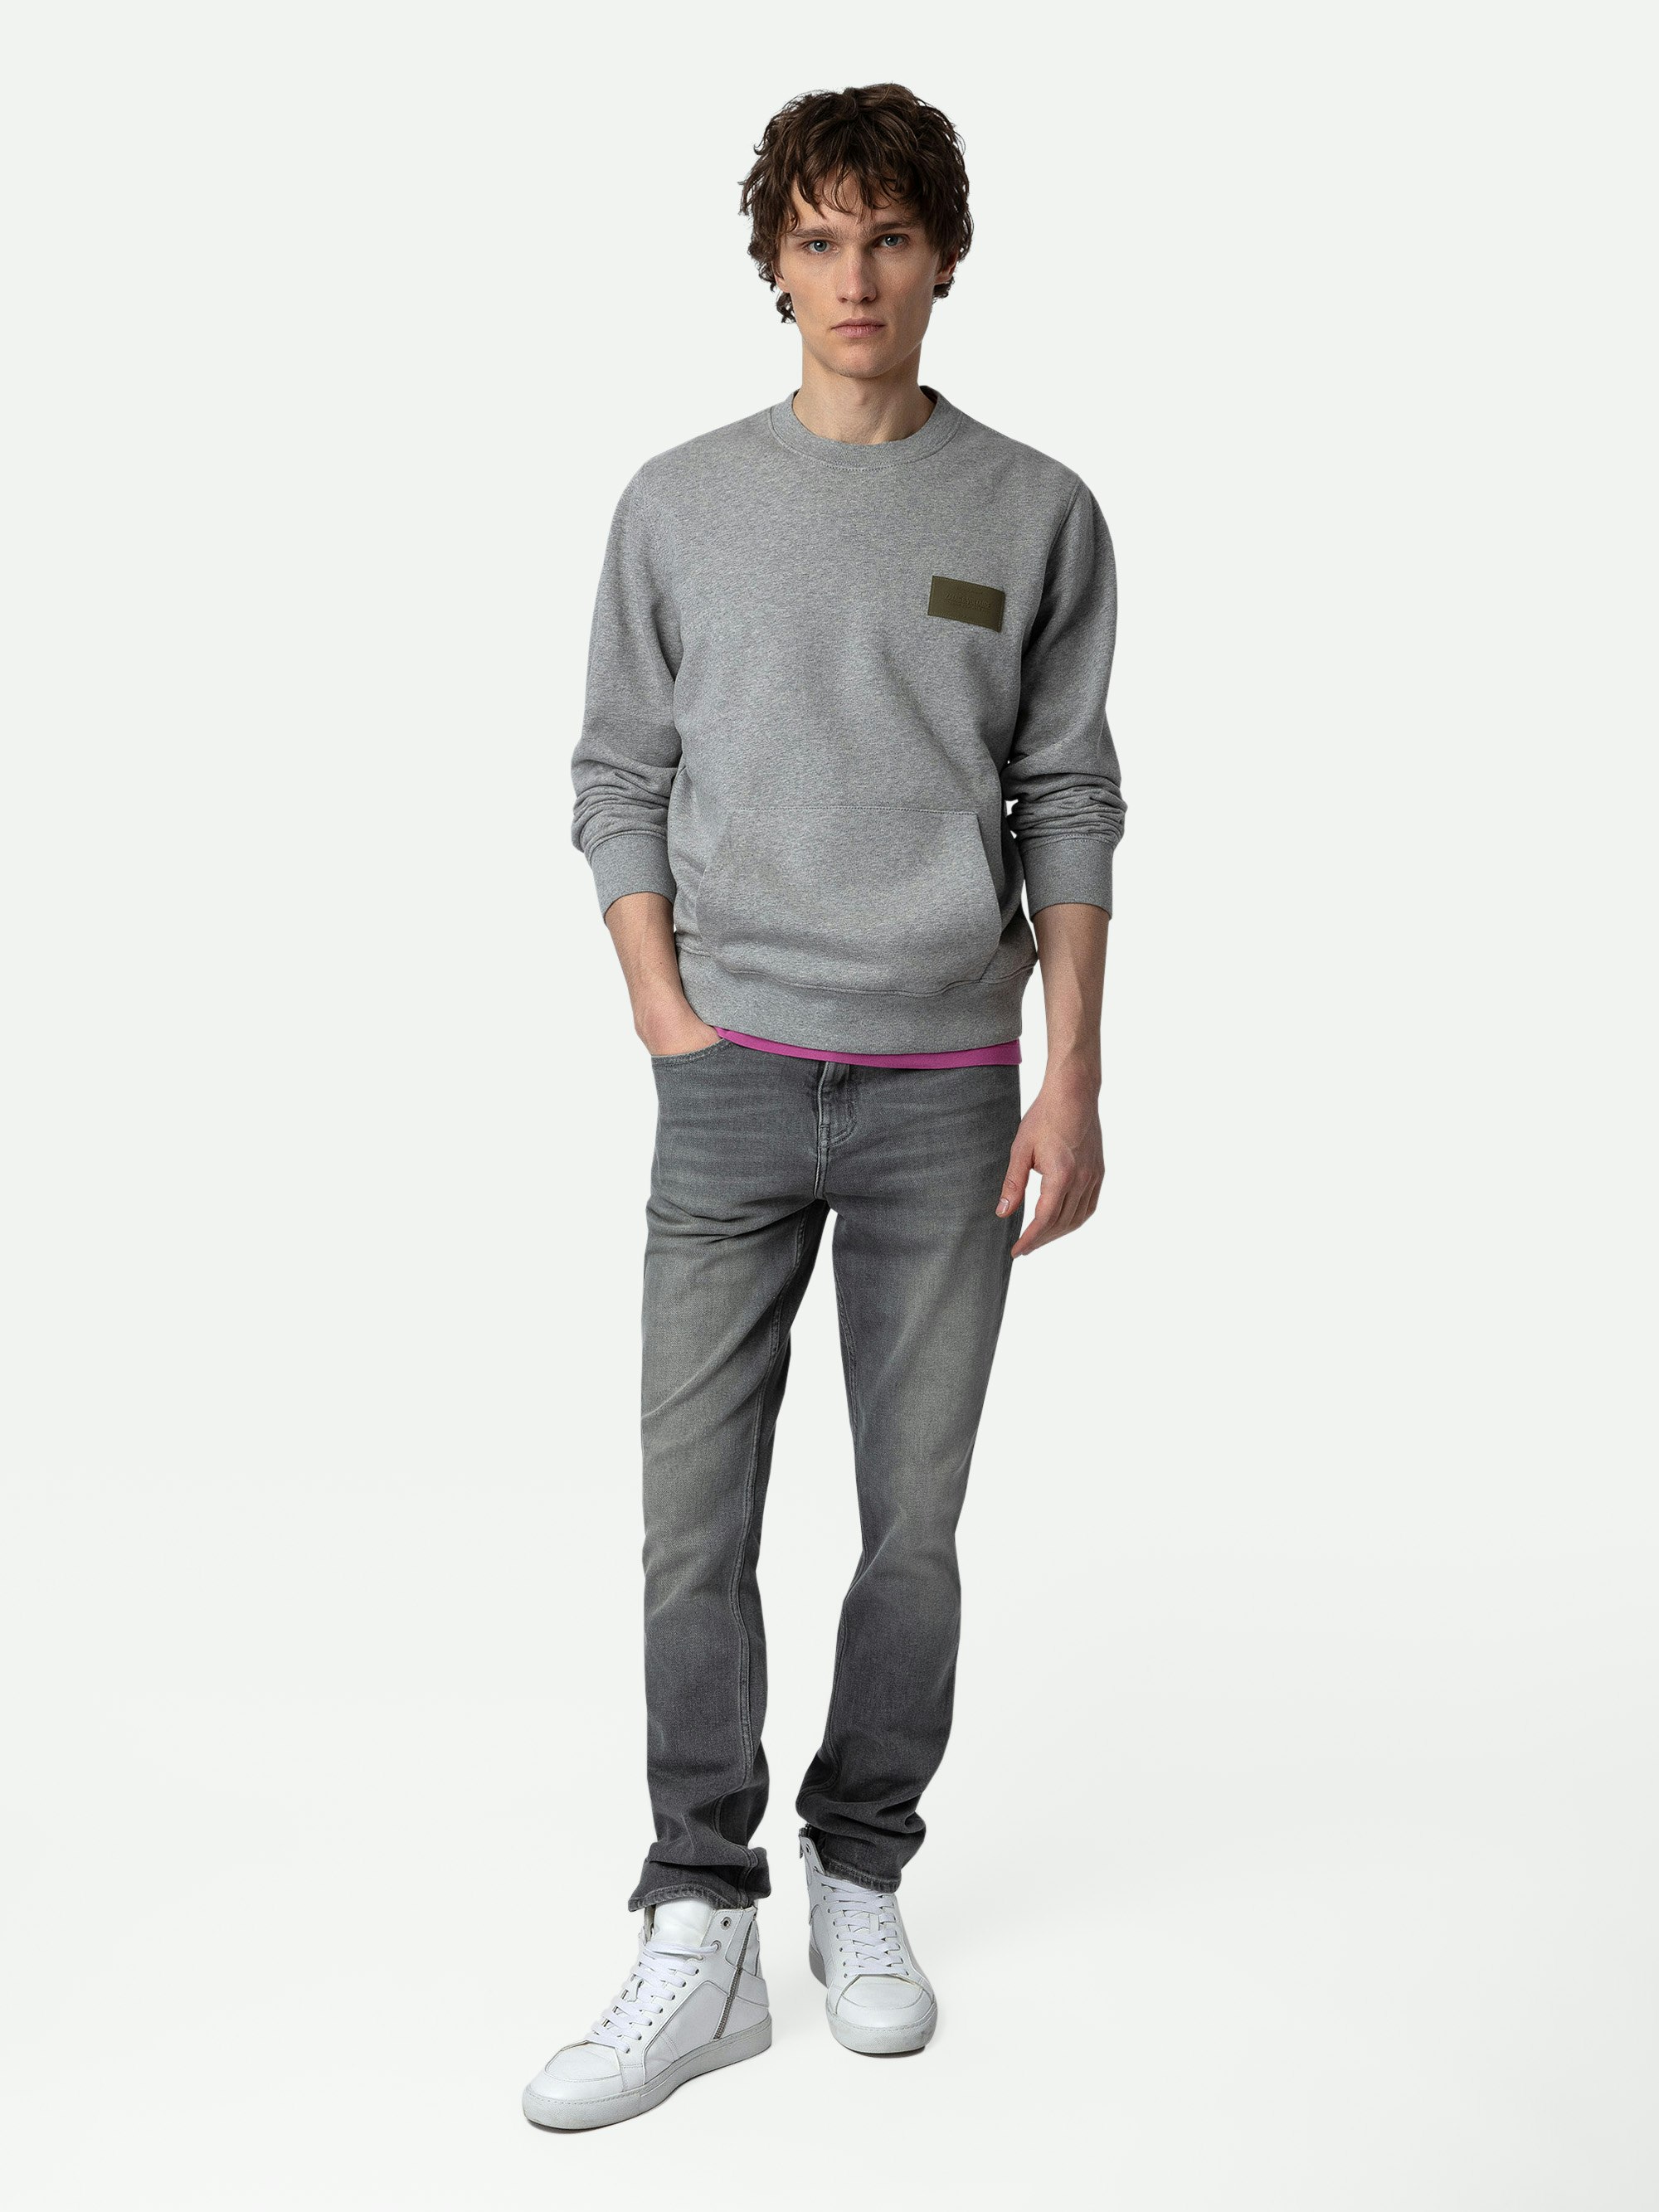 Aime Sweatshirt - Grey marl long-sleeved round-neck sweatshirt with patch on the chest.